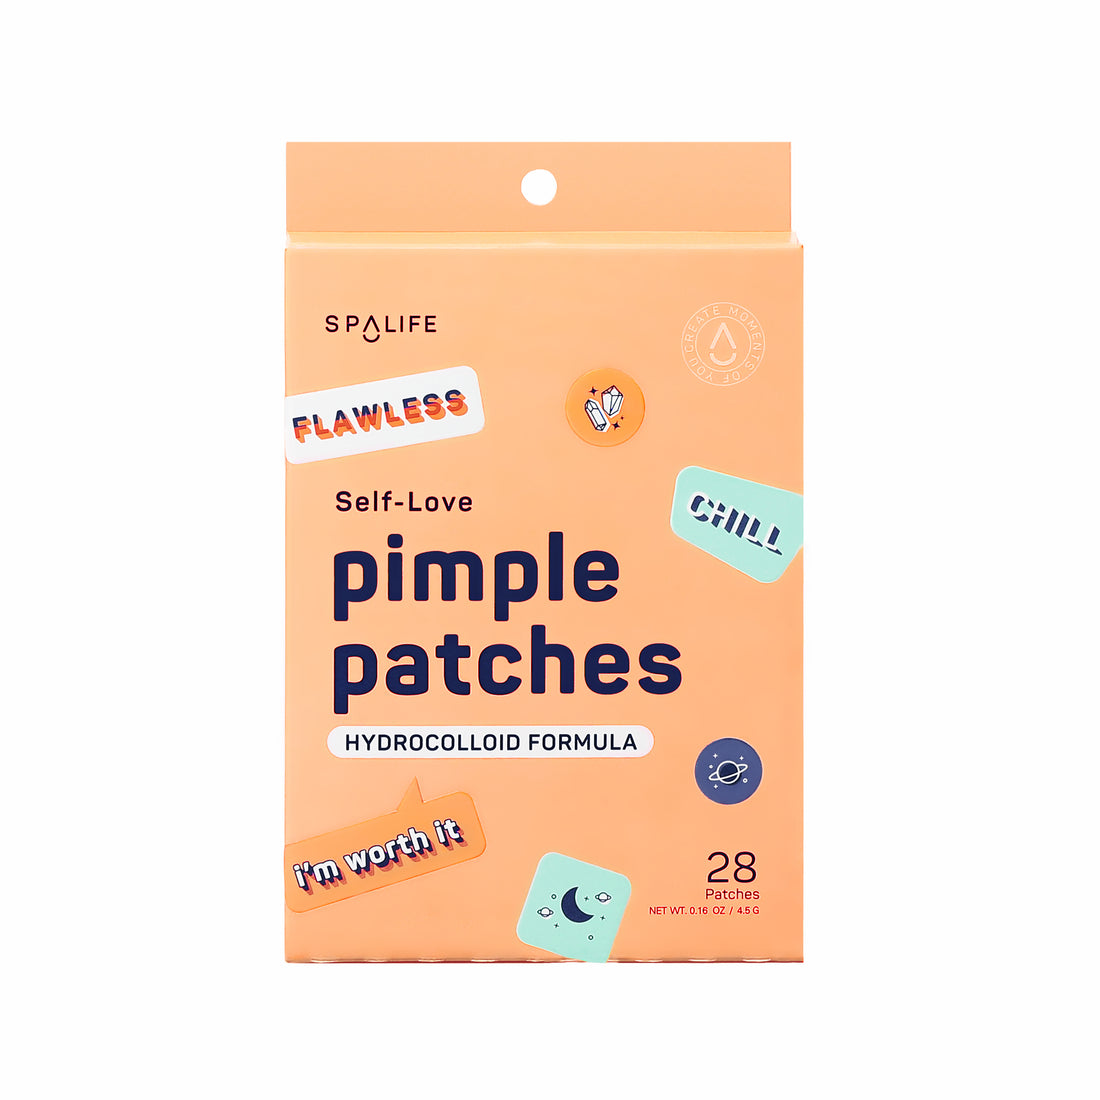 Self-Love Pimple Patches-696